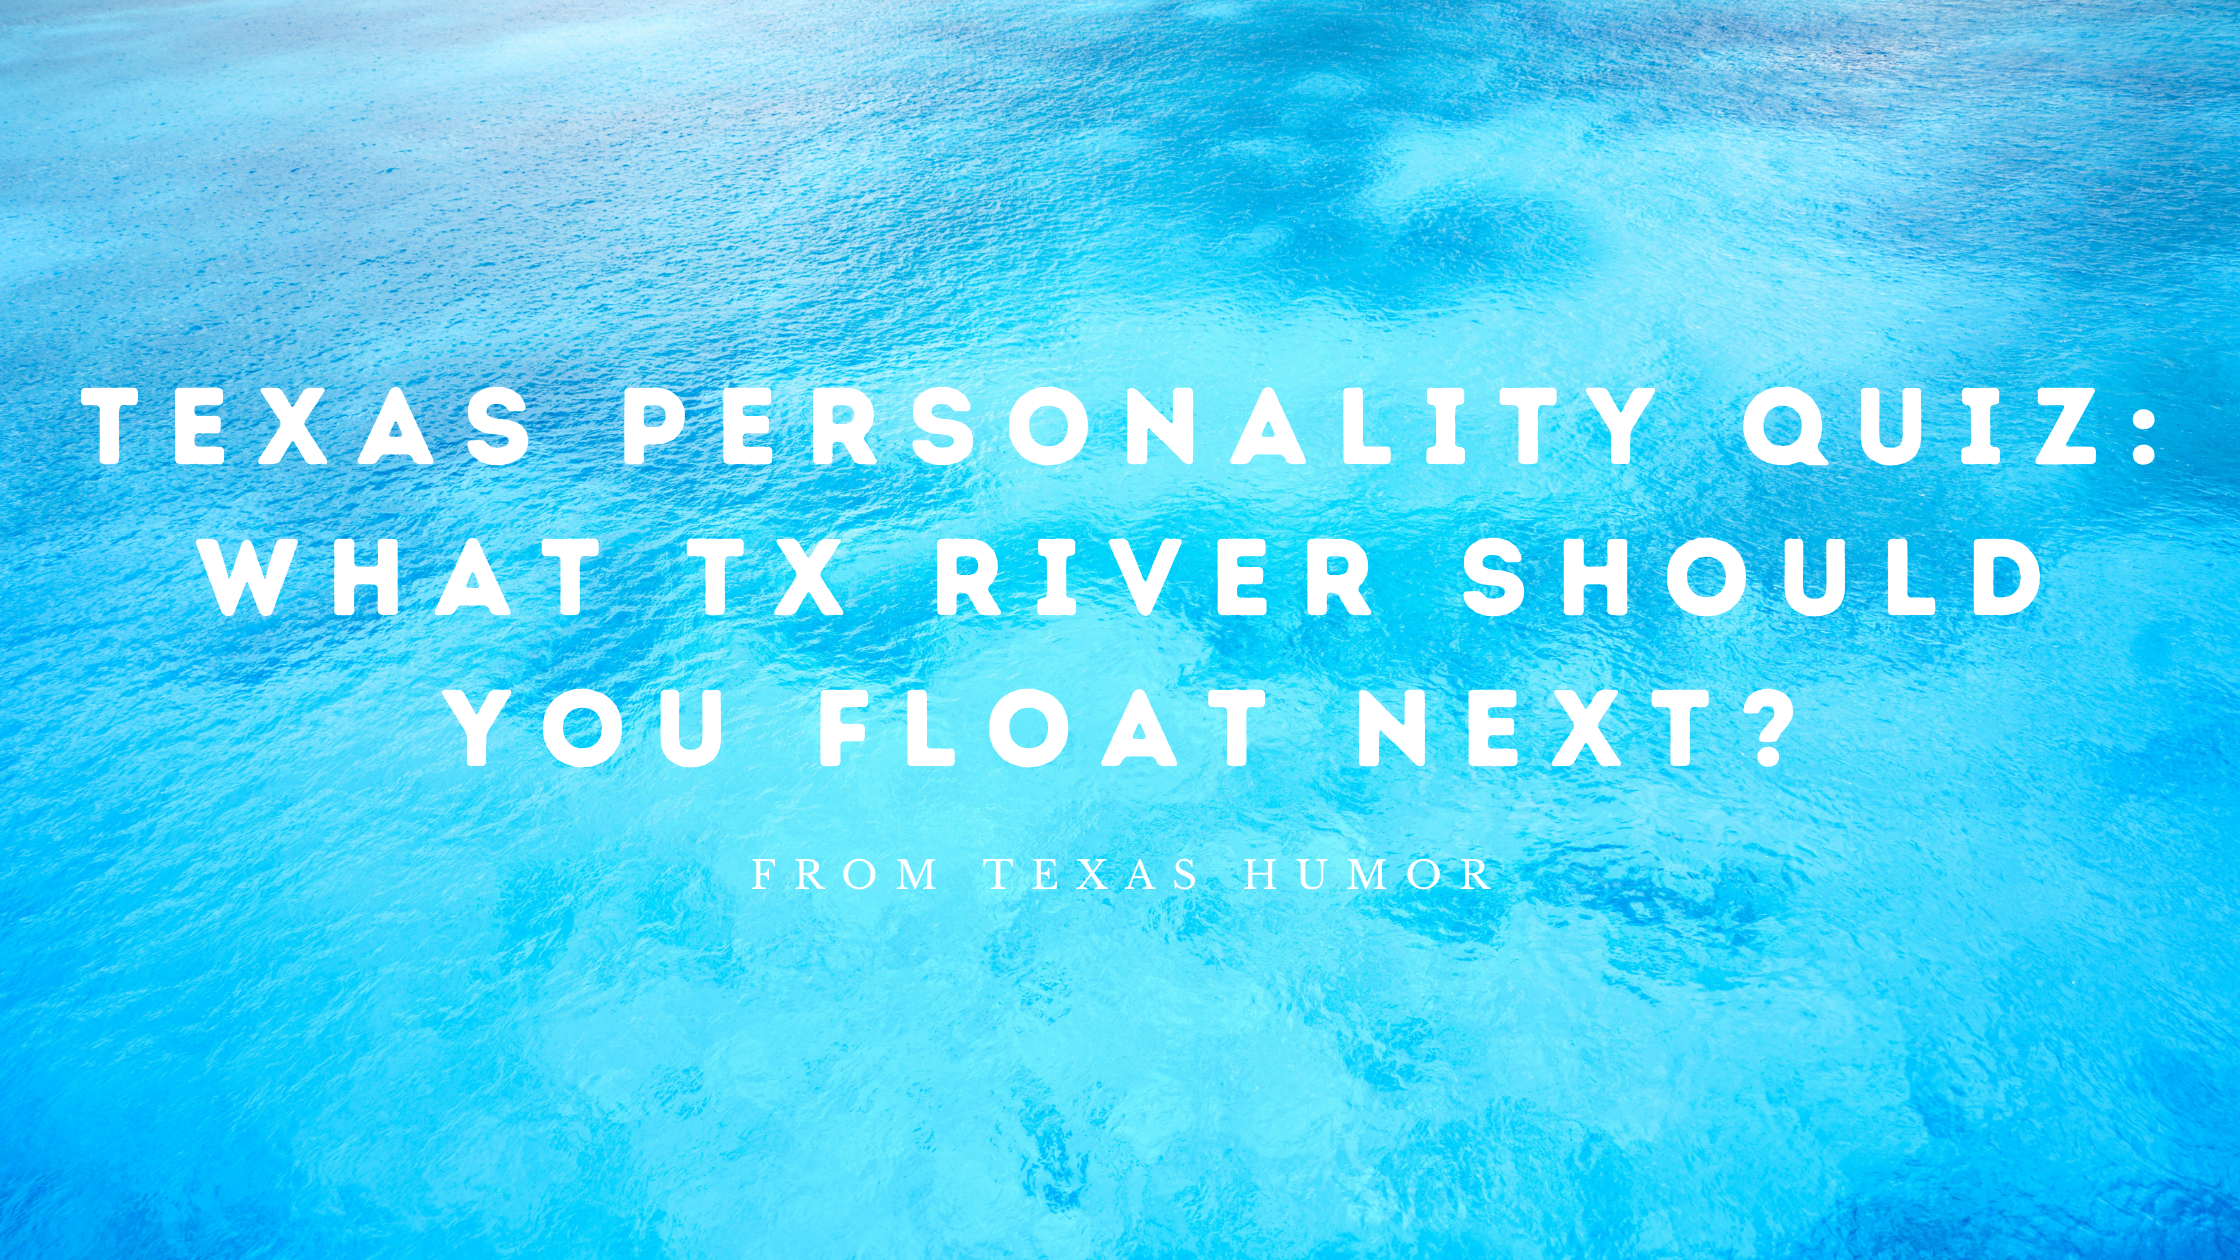 TEXAS PERSONALITY QUIZ: What Texas River will you float next?